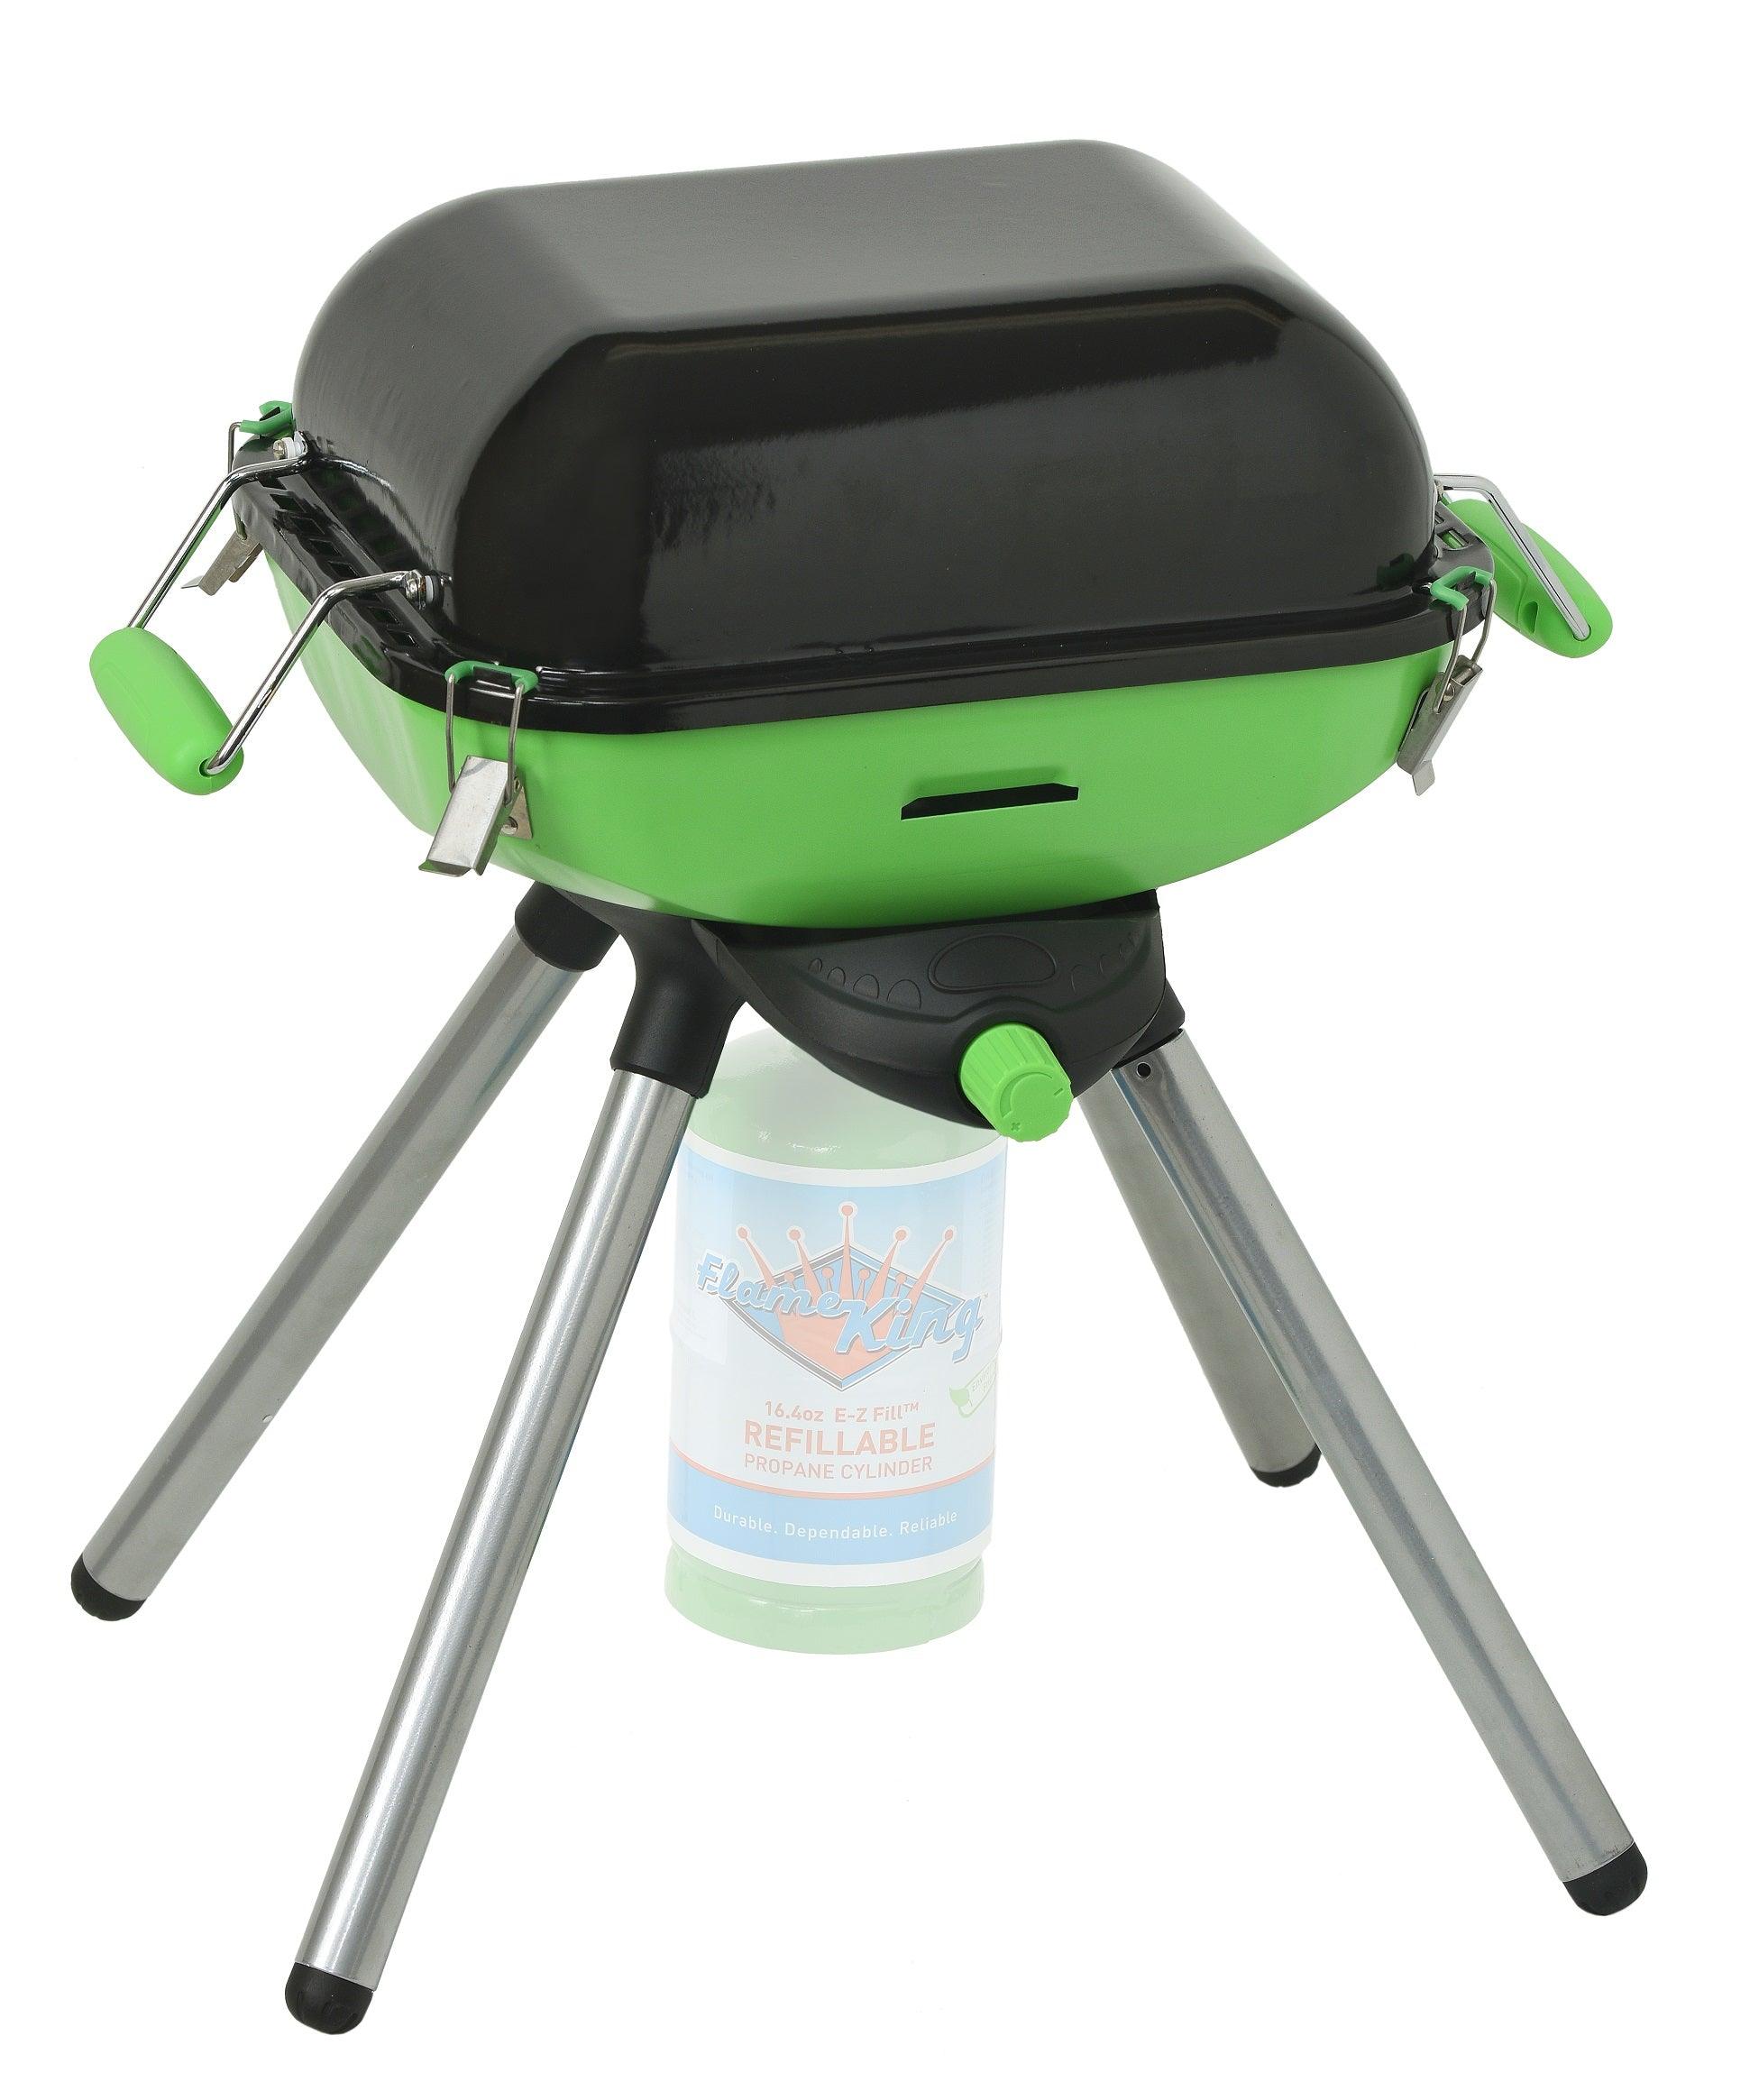 Flame King Multi-Function Portable BBQ Grill Camp Stove Camping - Flame King